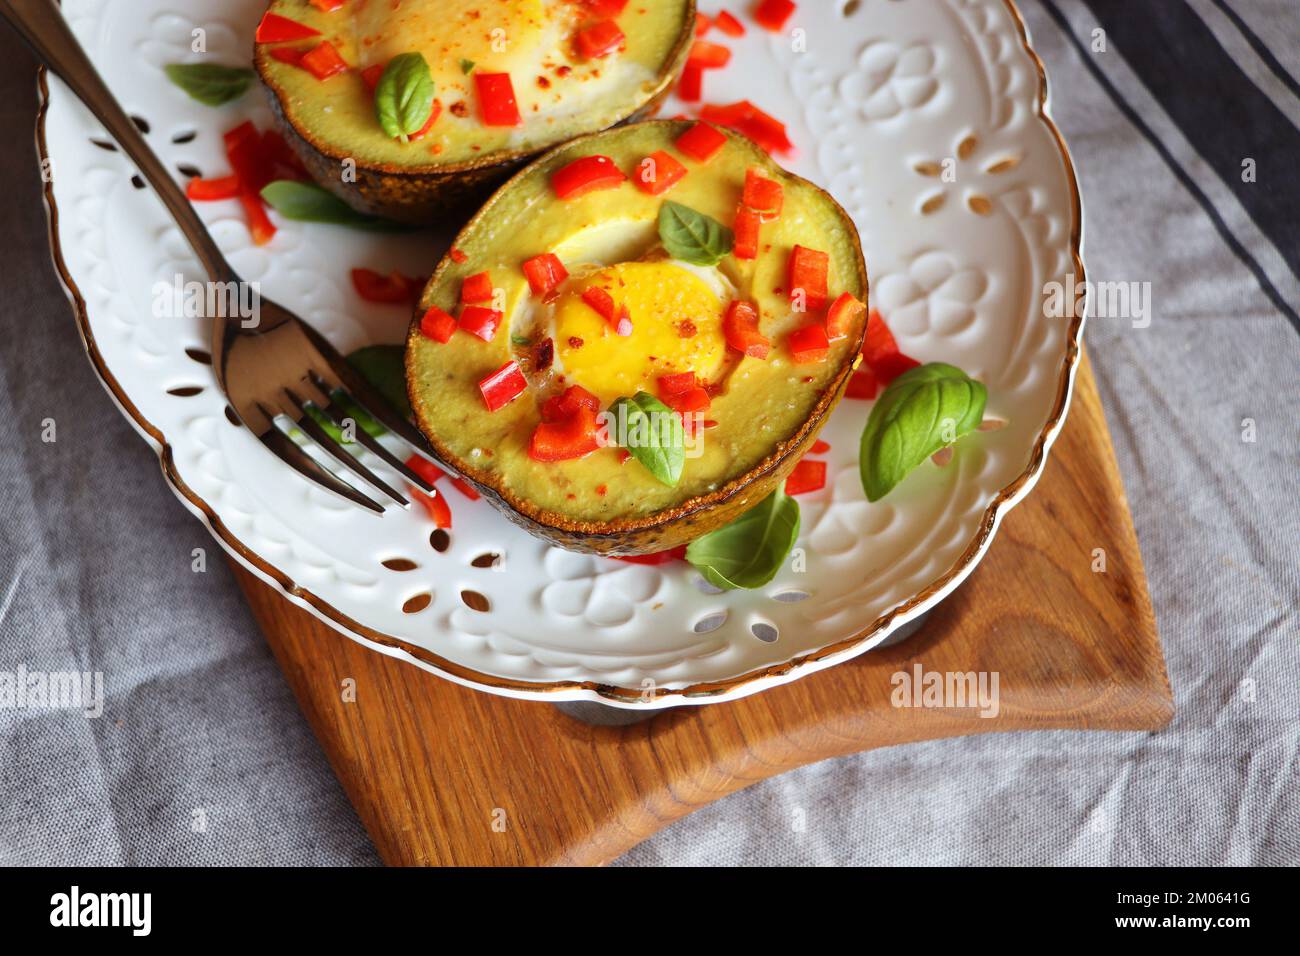 Keto diet. Healthy breakfast of baked avocado and eggs boats with herbs . Stock Photo